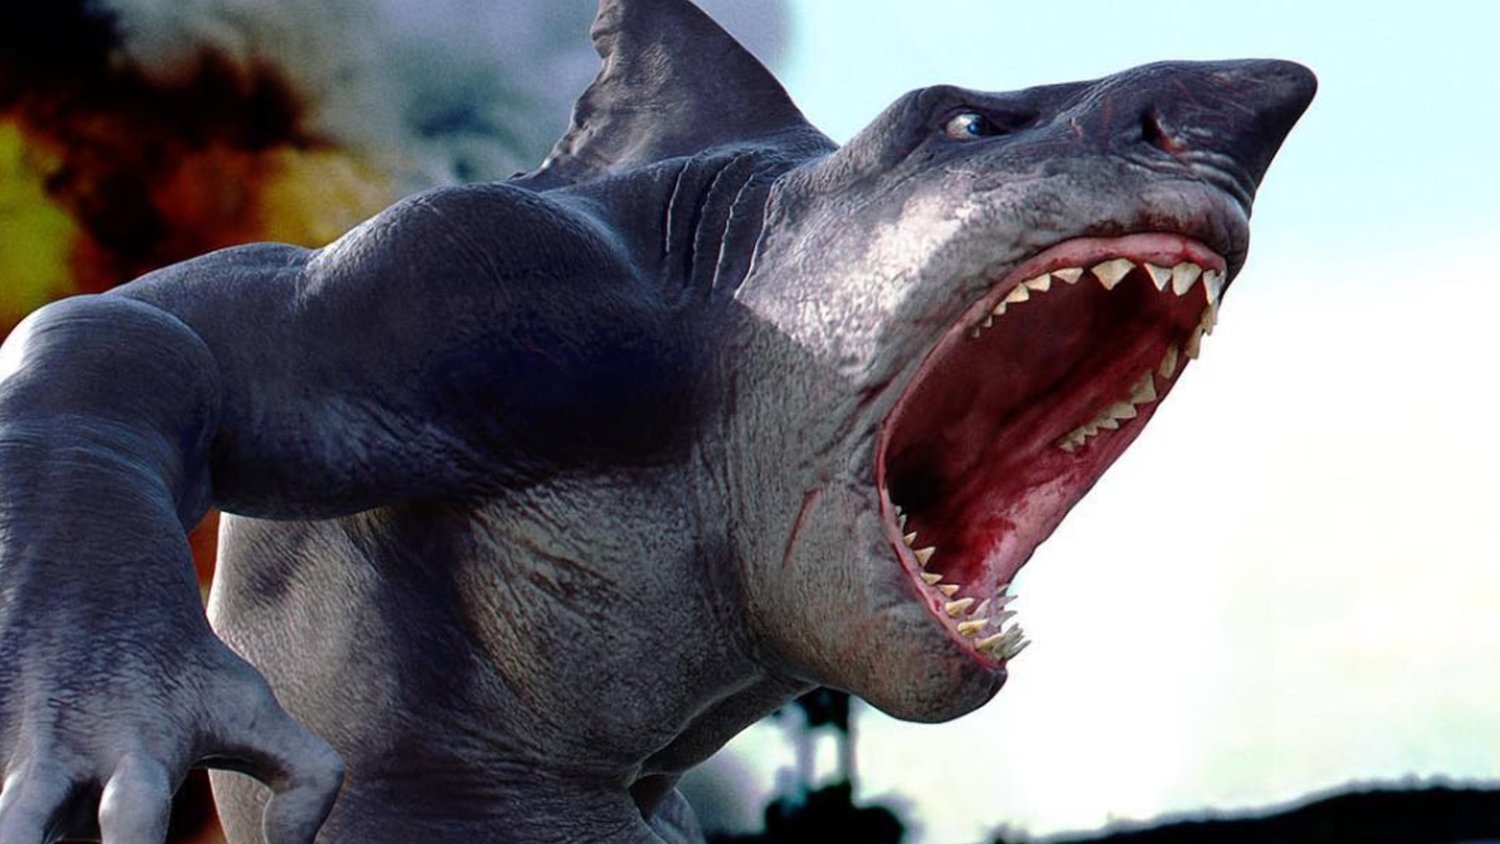 This Is What A Life Like CG Animated STREET SHARKS Movie Could Look Like!